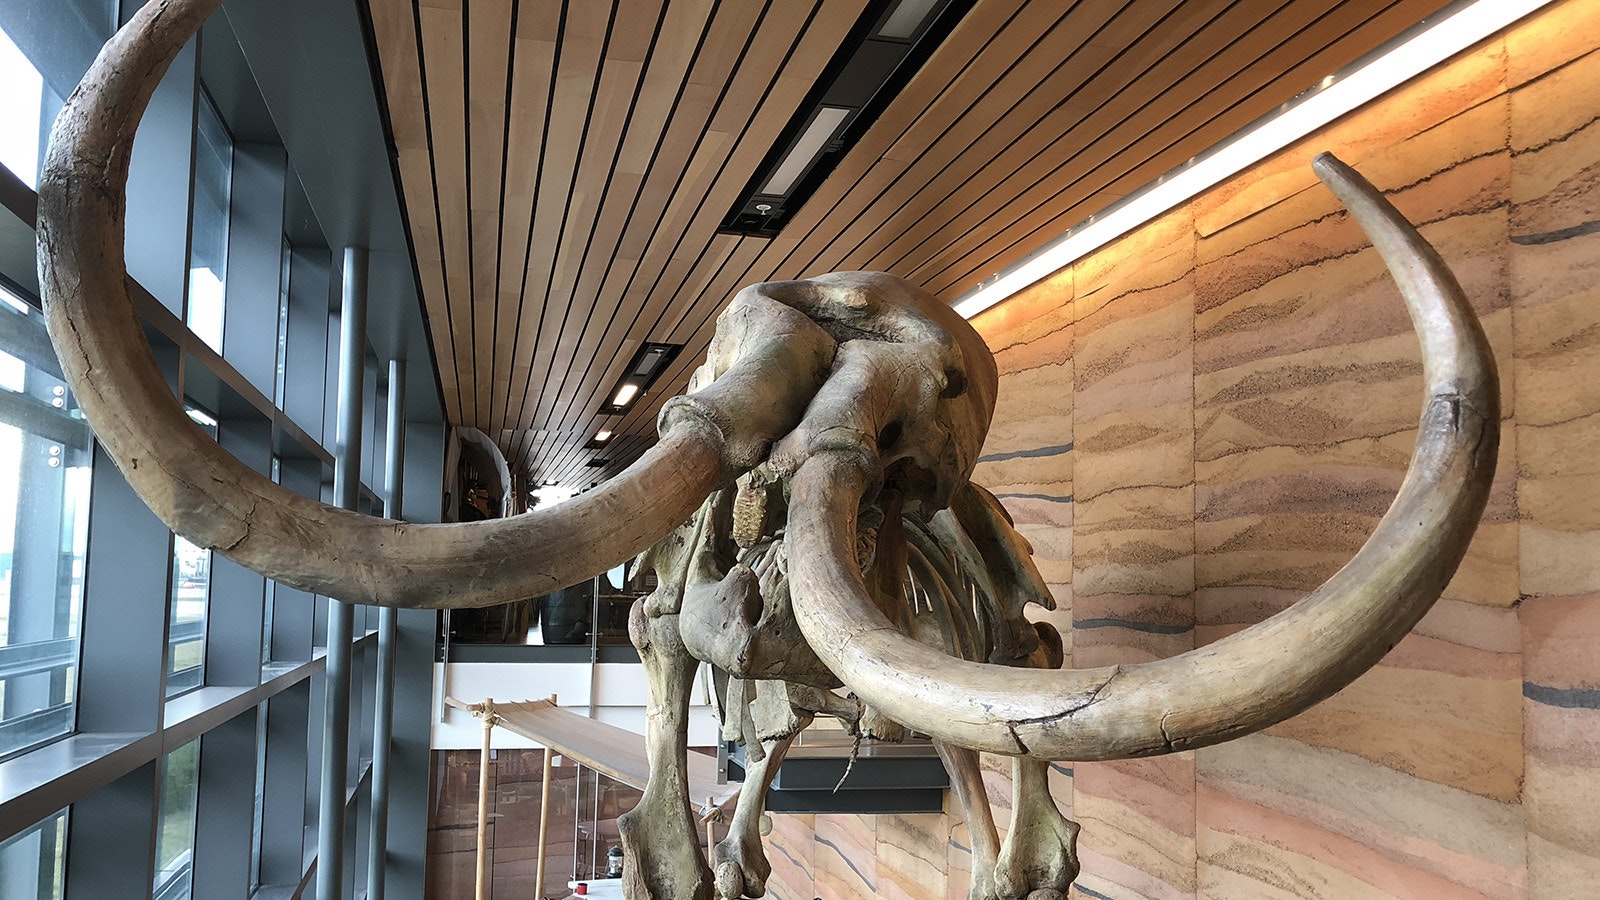 A replica of "Dee" the Columbian mammoth at the Southeast Wyoming Visitor Center in Cheyenne. "Dee," excavated near Glenrock in 2006, is at least 11,000 years old and one of the largest Columbian mammoths ever found.